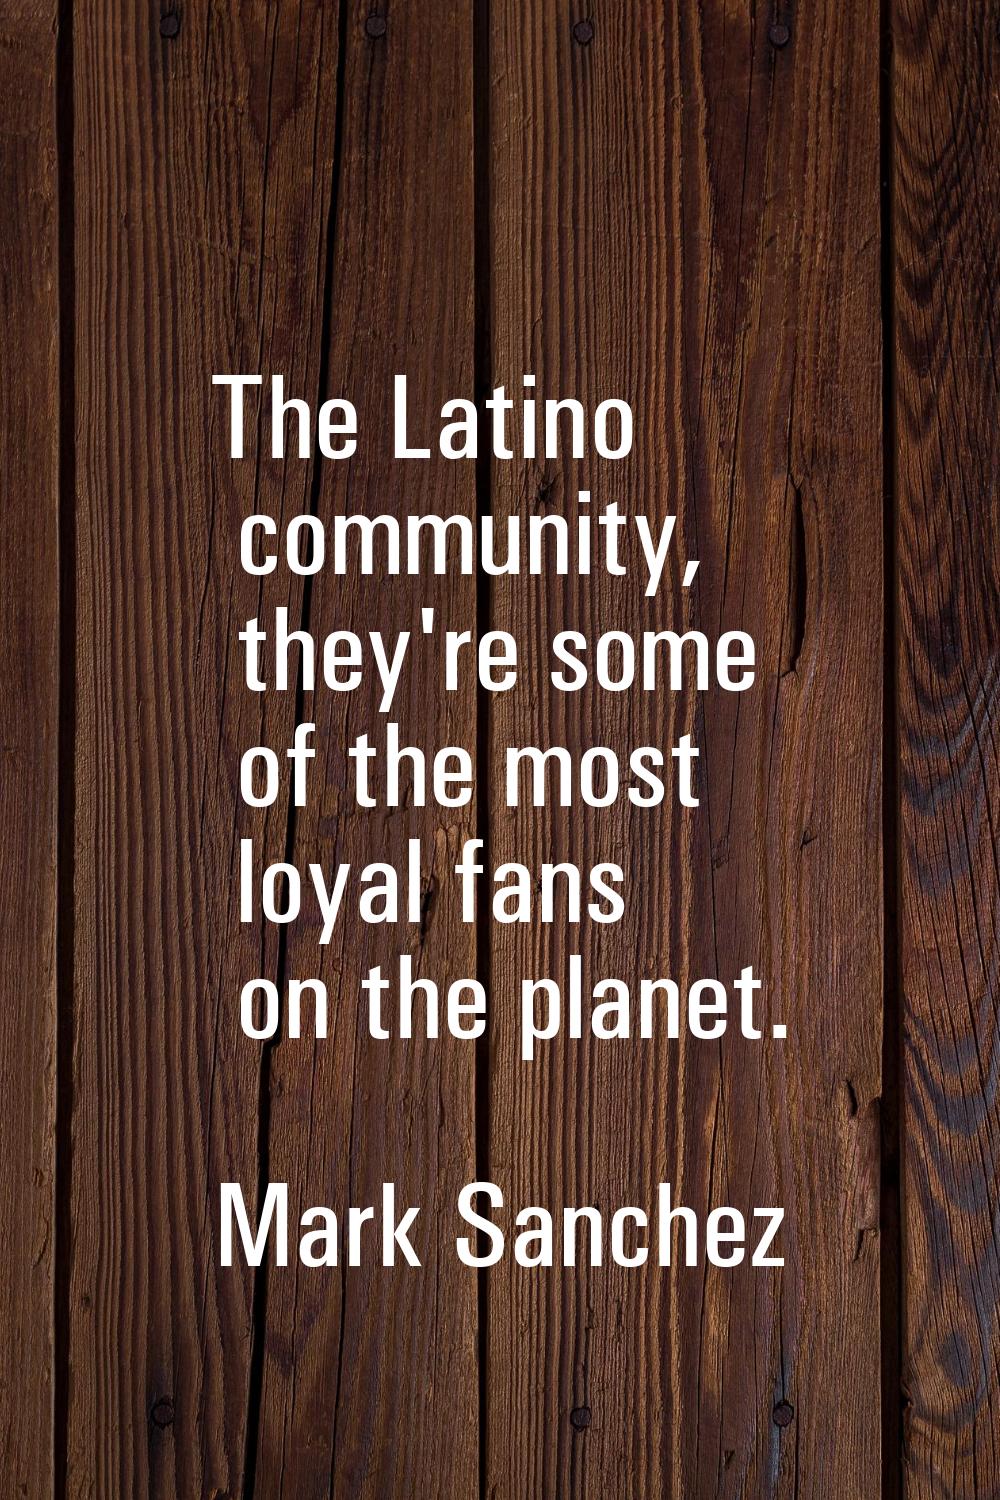 The Latino community, they're some of the most loyal fans on the planet.